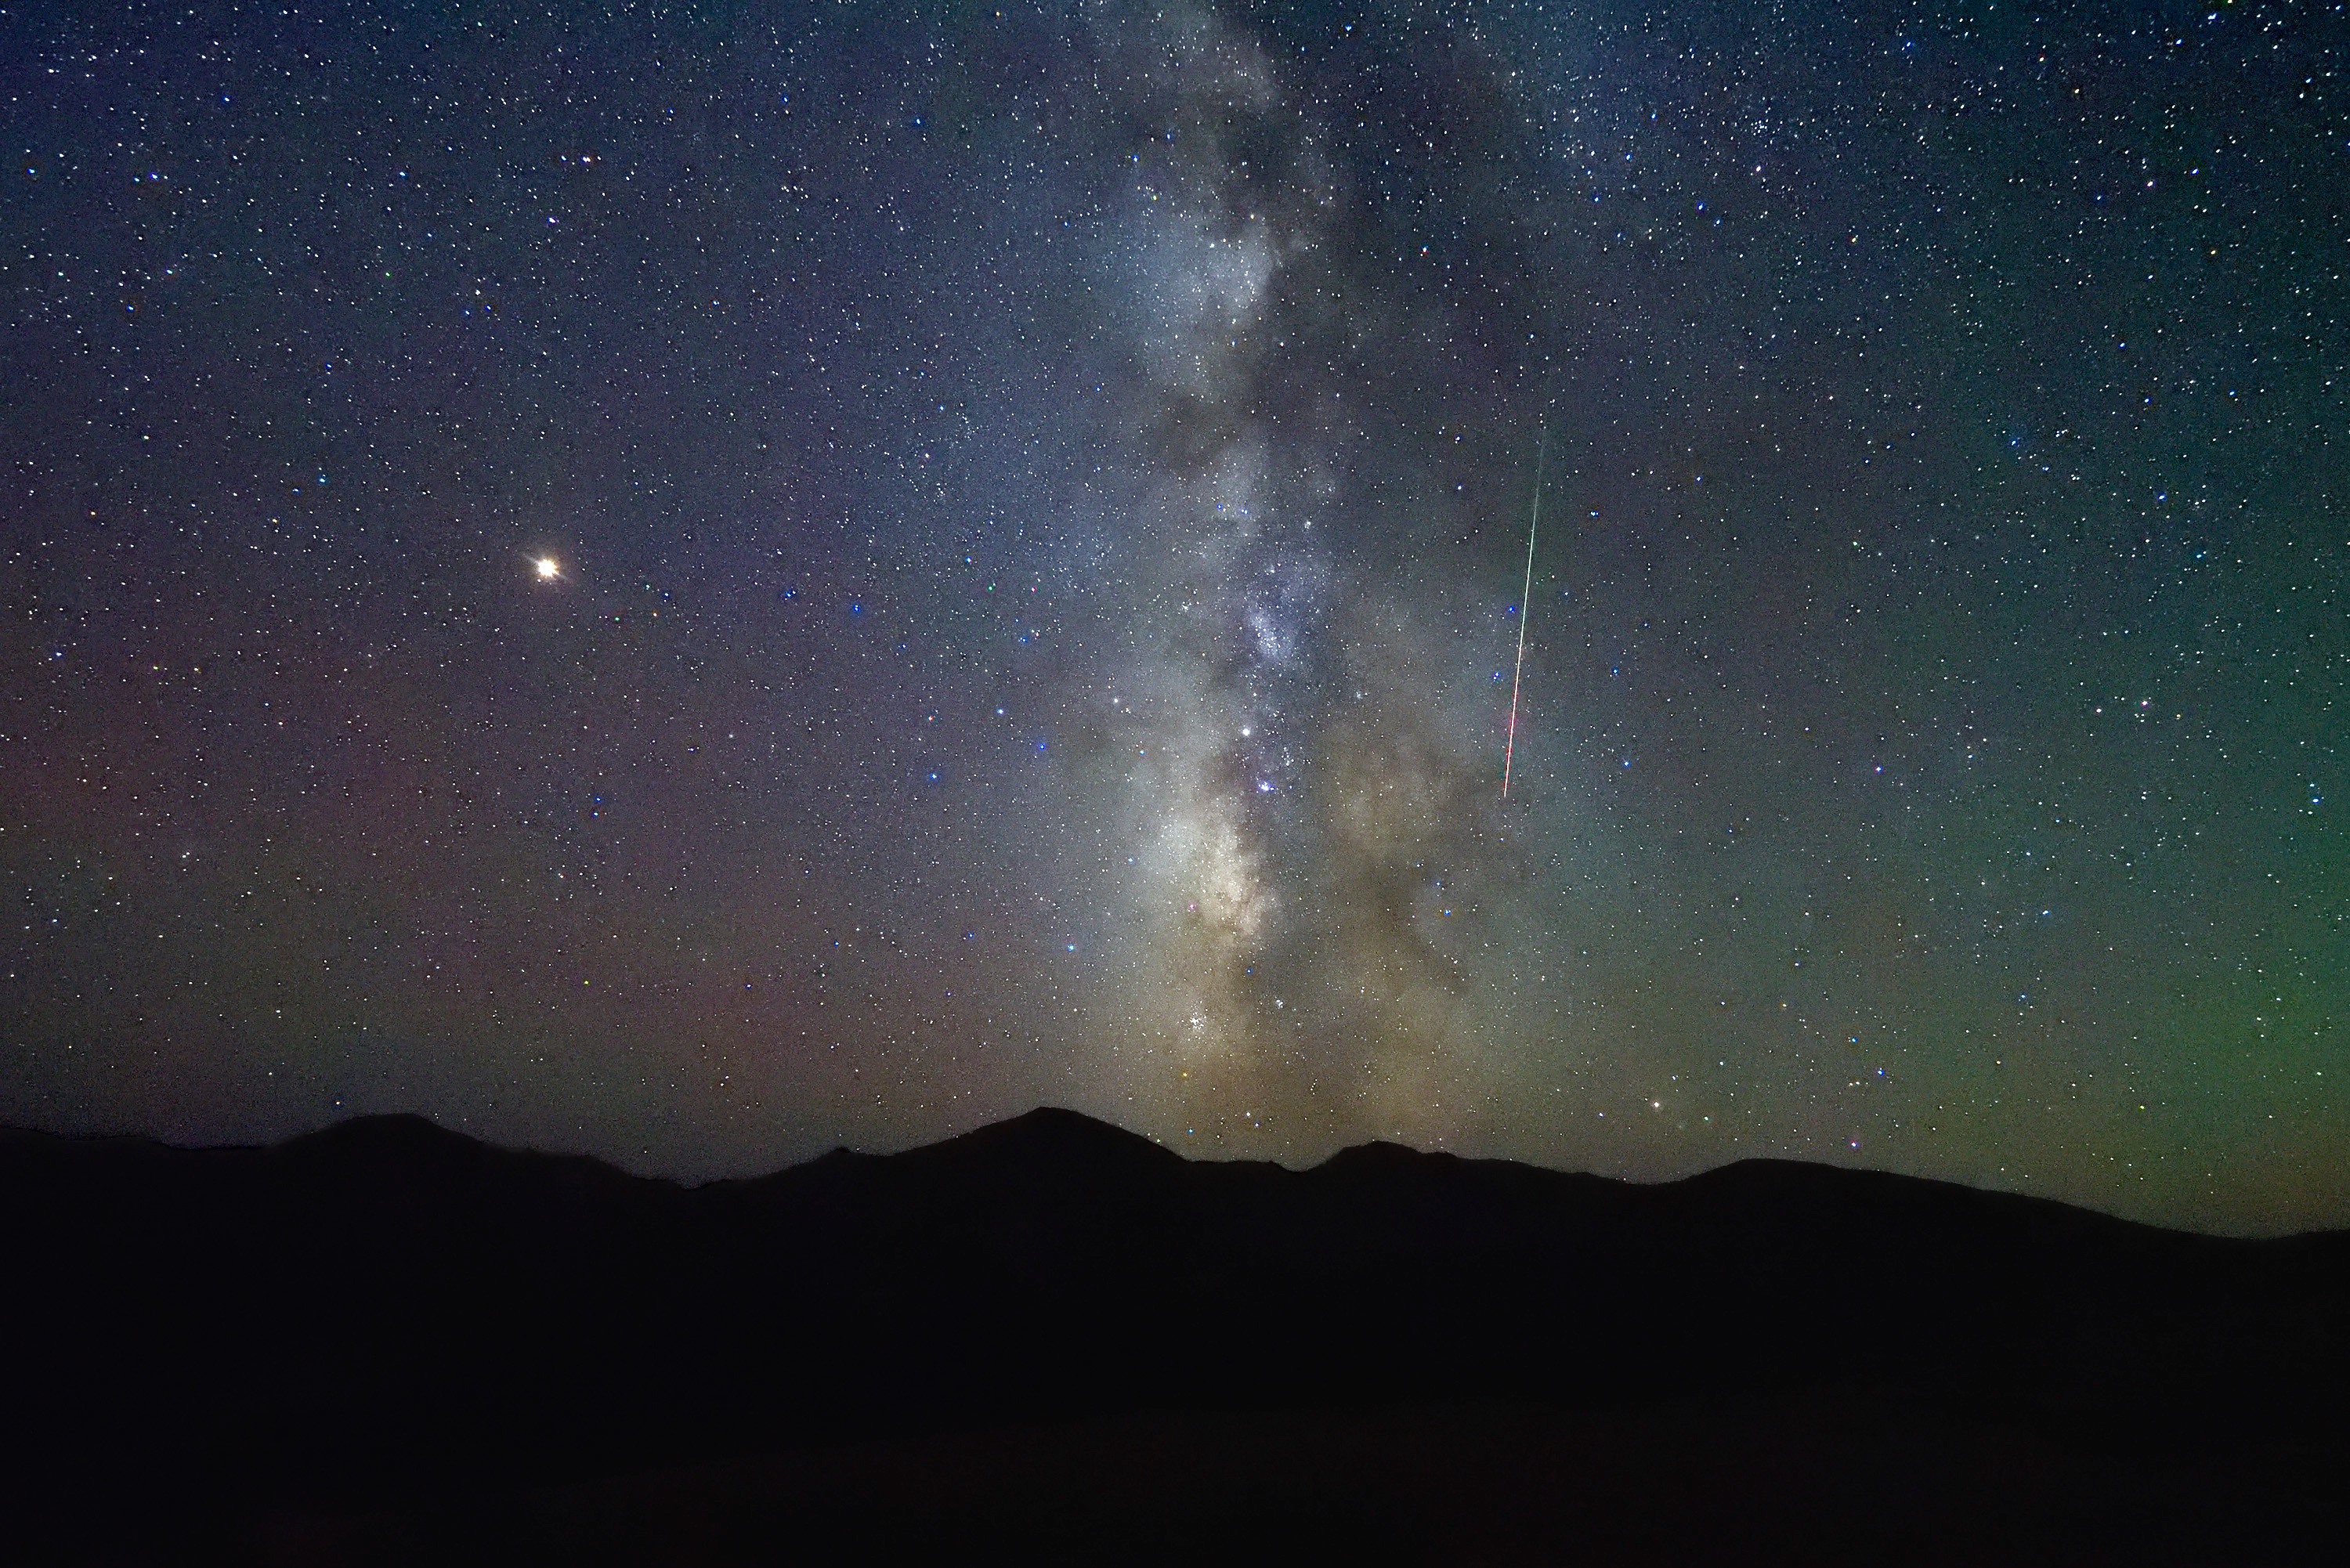 
        <div class='title'>
          Meteoric Milky Way
        </div>
       
        <div class='description'>
          cA Perseids meteor streaks across the sky next to the Milky Way during a night spent at Independence Pass, high in the Sawatch Range above Aspen, Colorado
        </div>
      